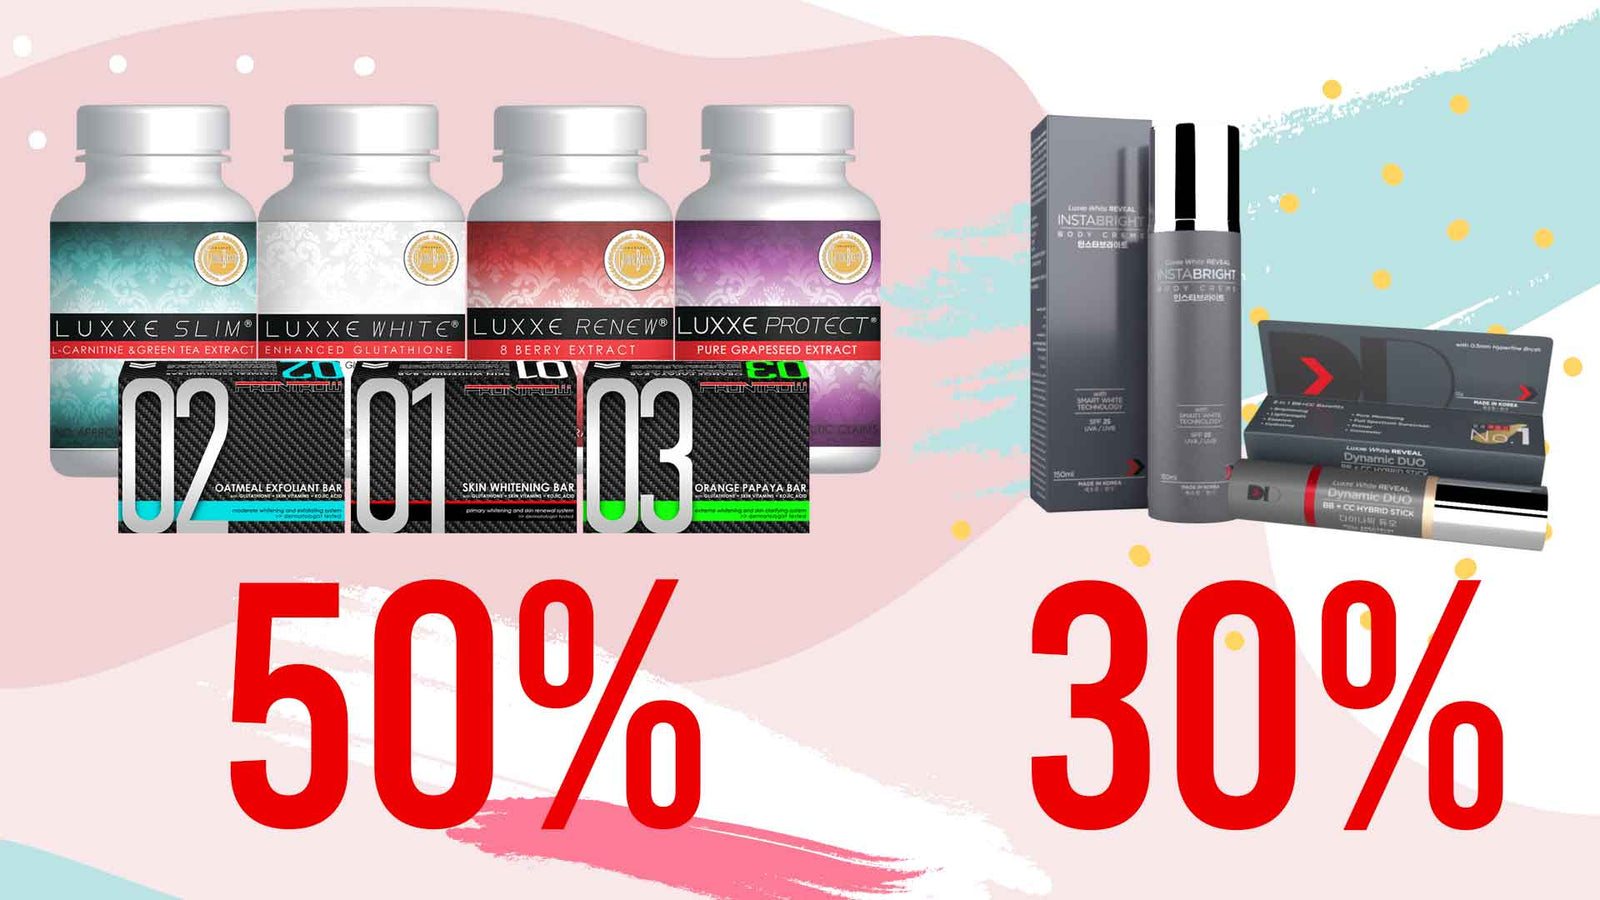 frontrow products 50% discount lifetime